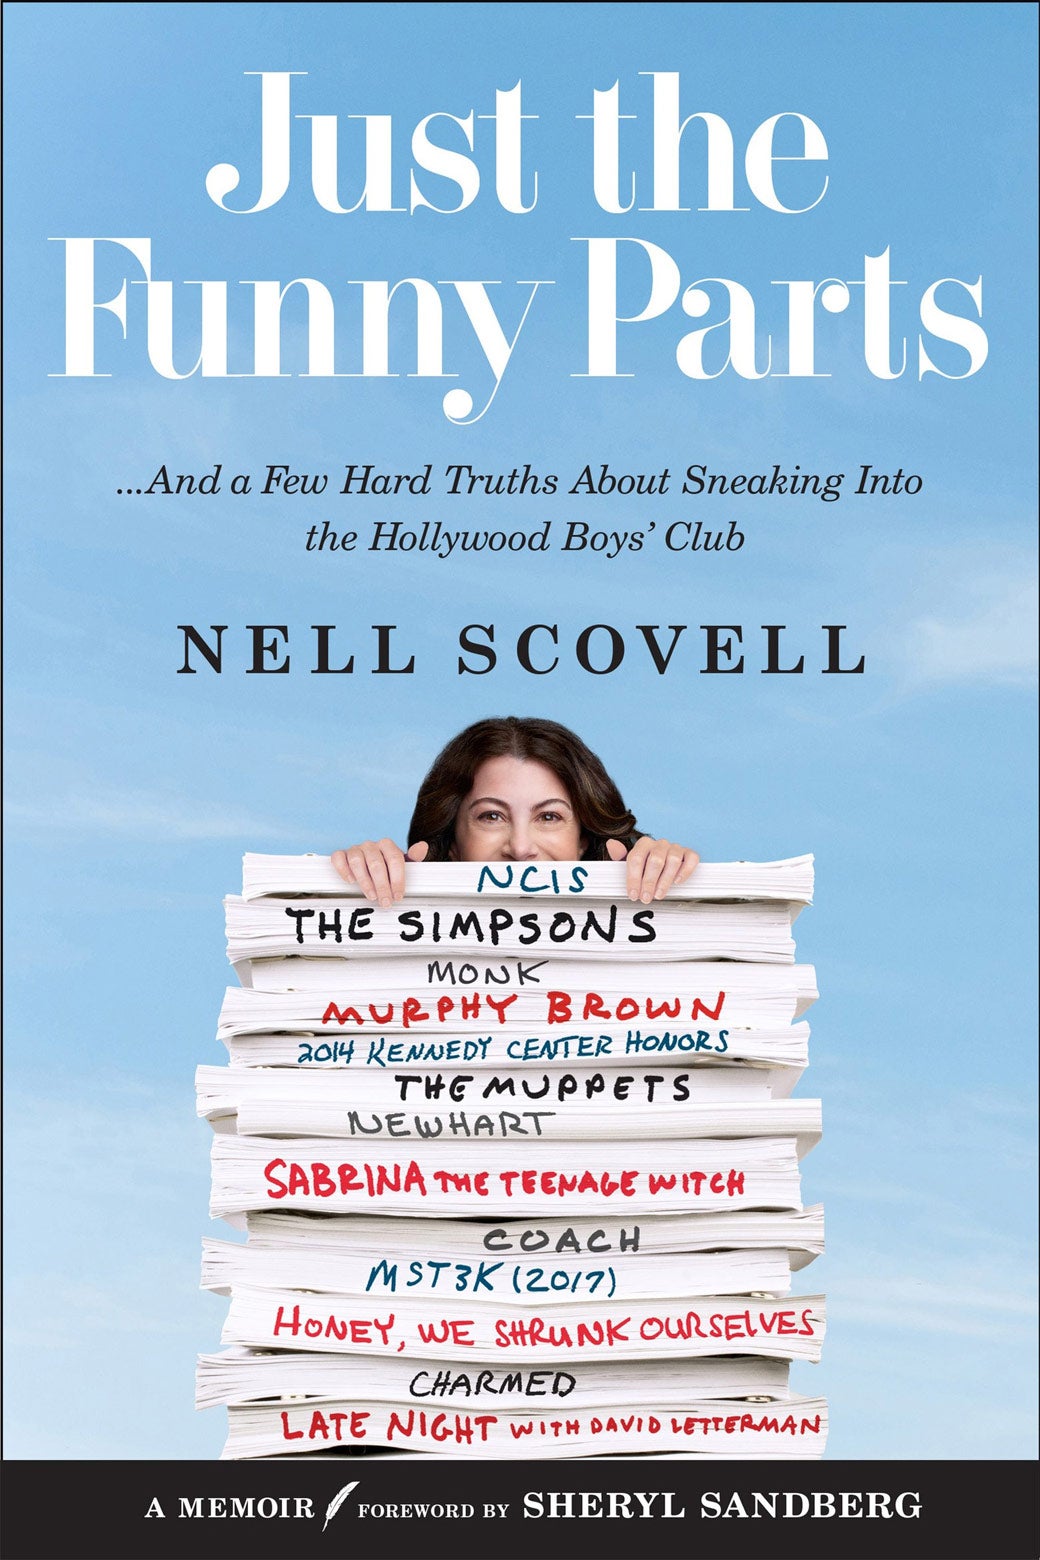 The cover of Scovell's book